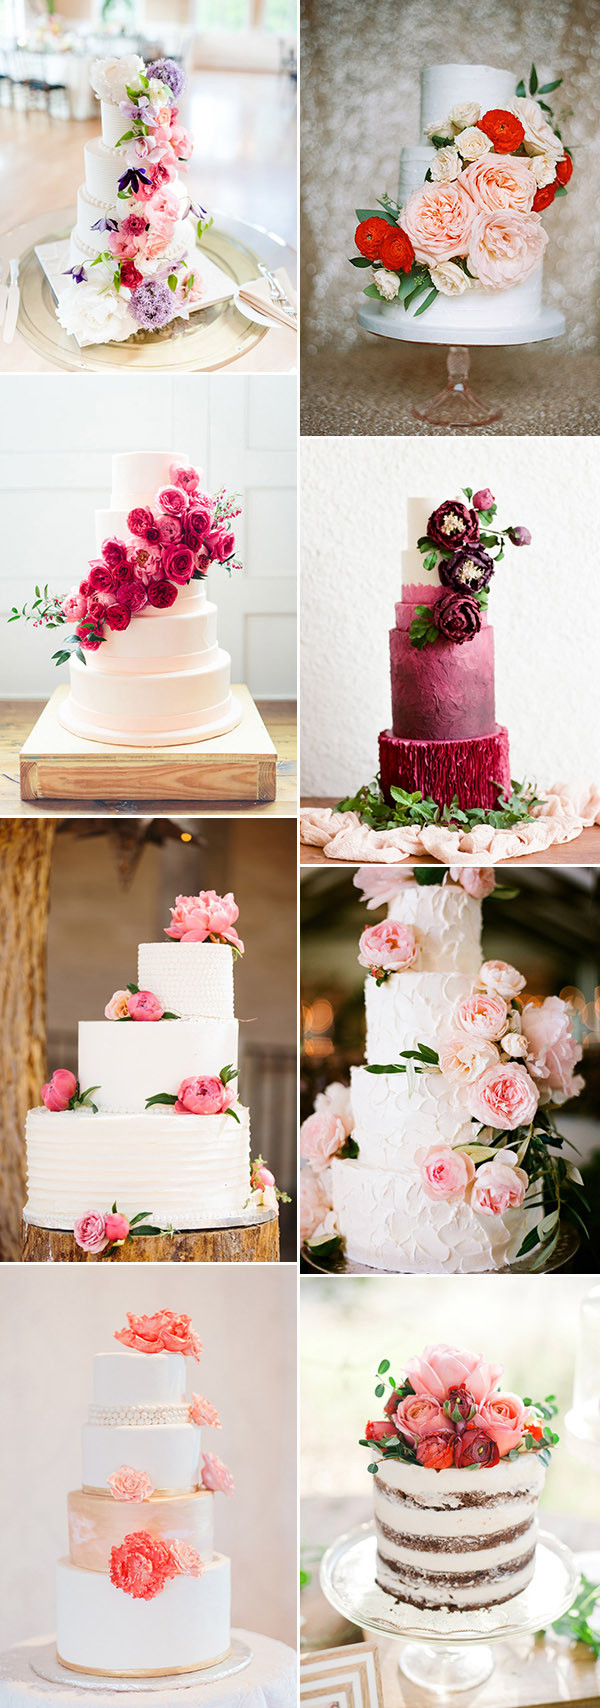 Fabulous Wedding Cakes
 Wedding Trend 20 Fabulous Wedding Cakes with Floral for